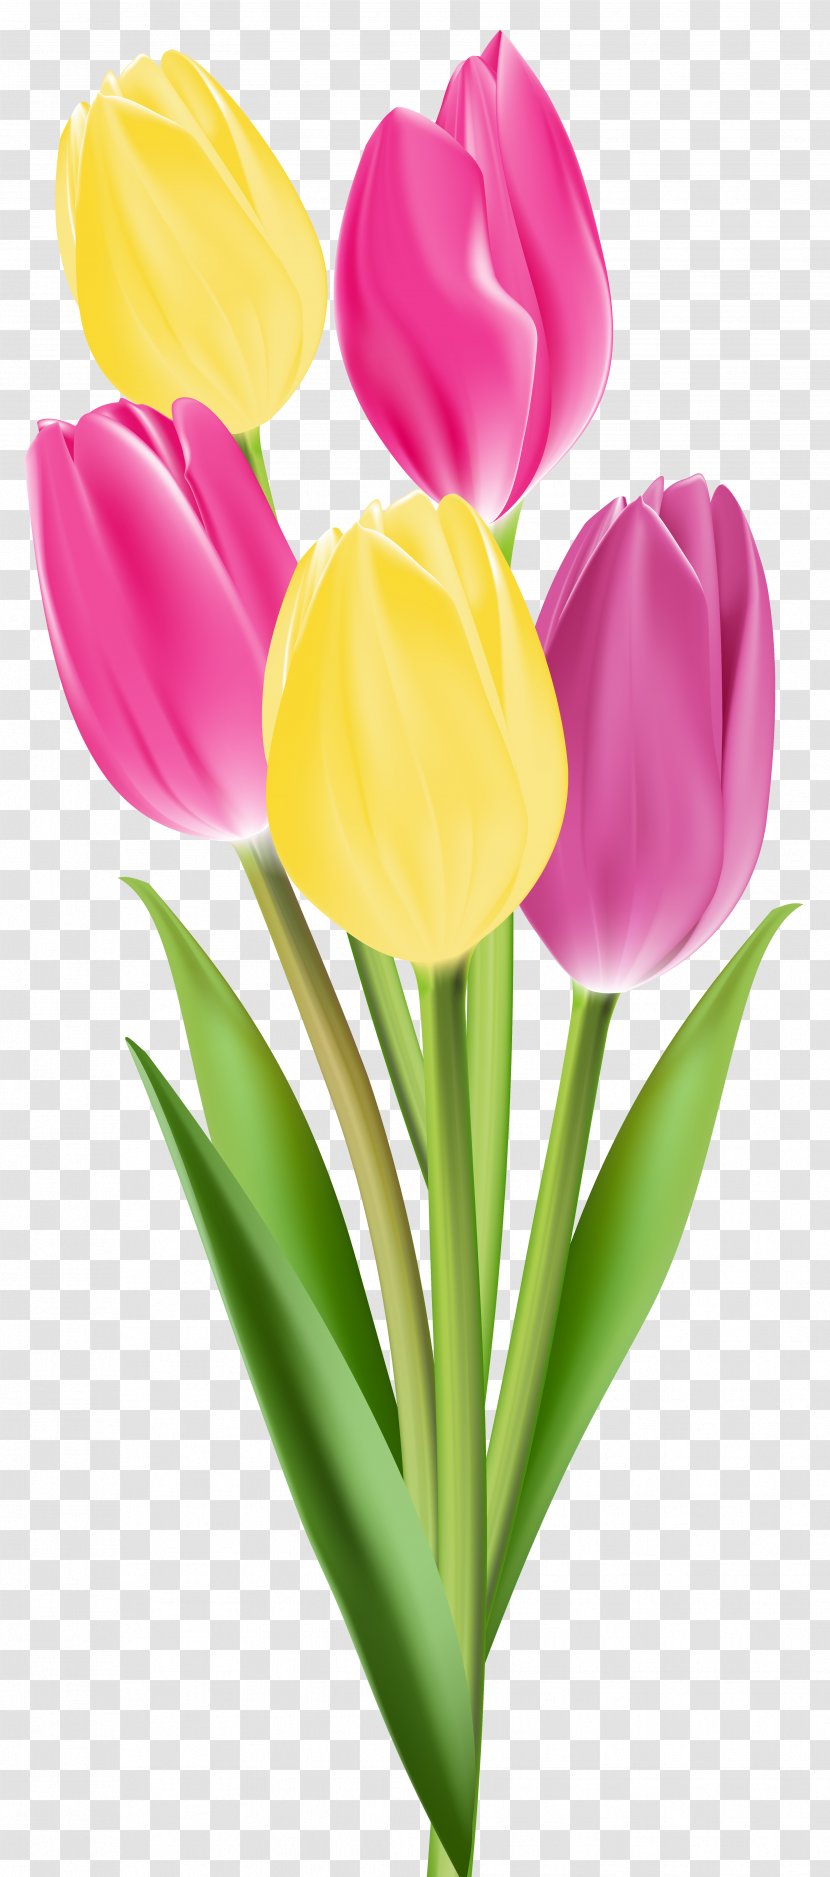 Tulip Time Festival - Stock Photography - Tulips Image Transparent PNG